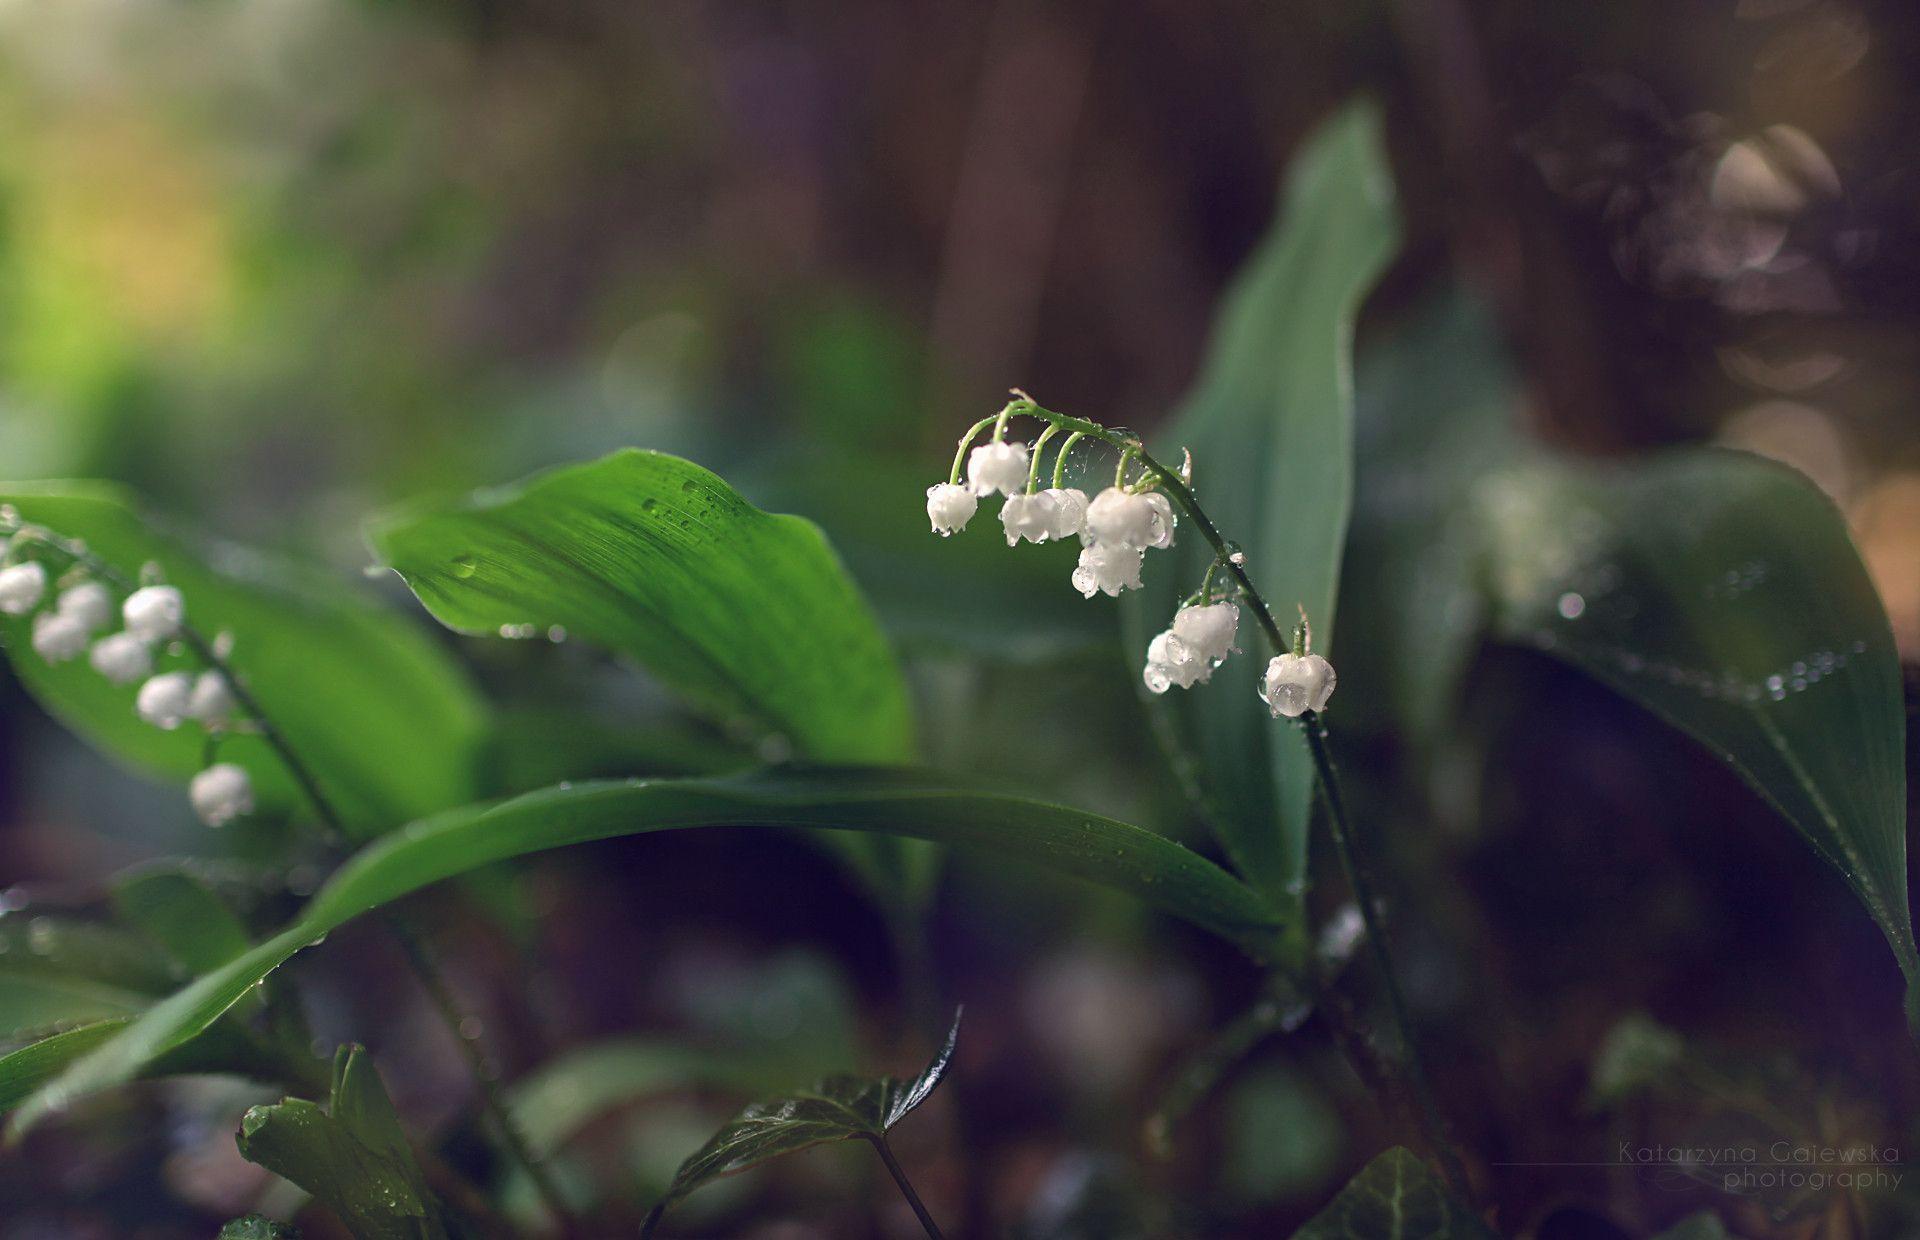 Lily Of The Valley Wallpapers - Wallpaper Cave